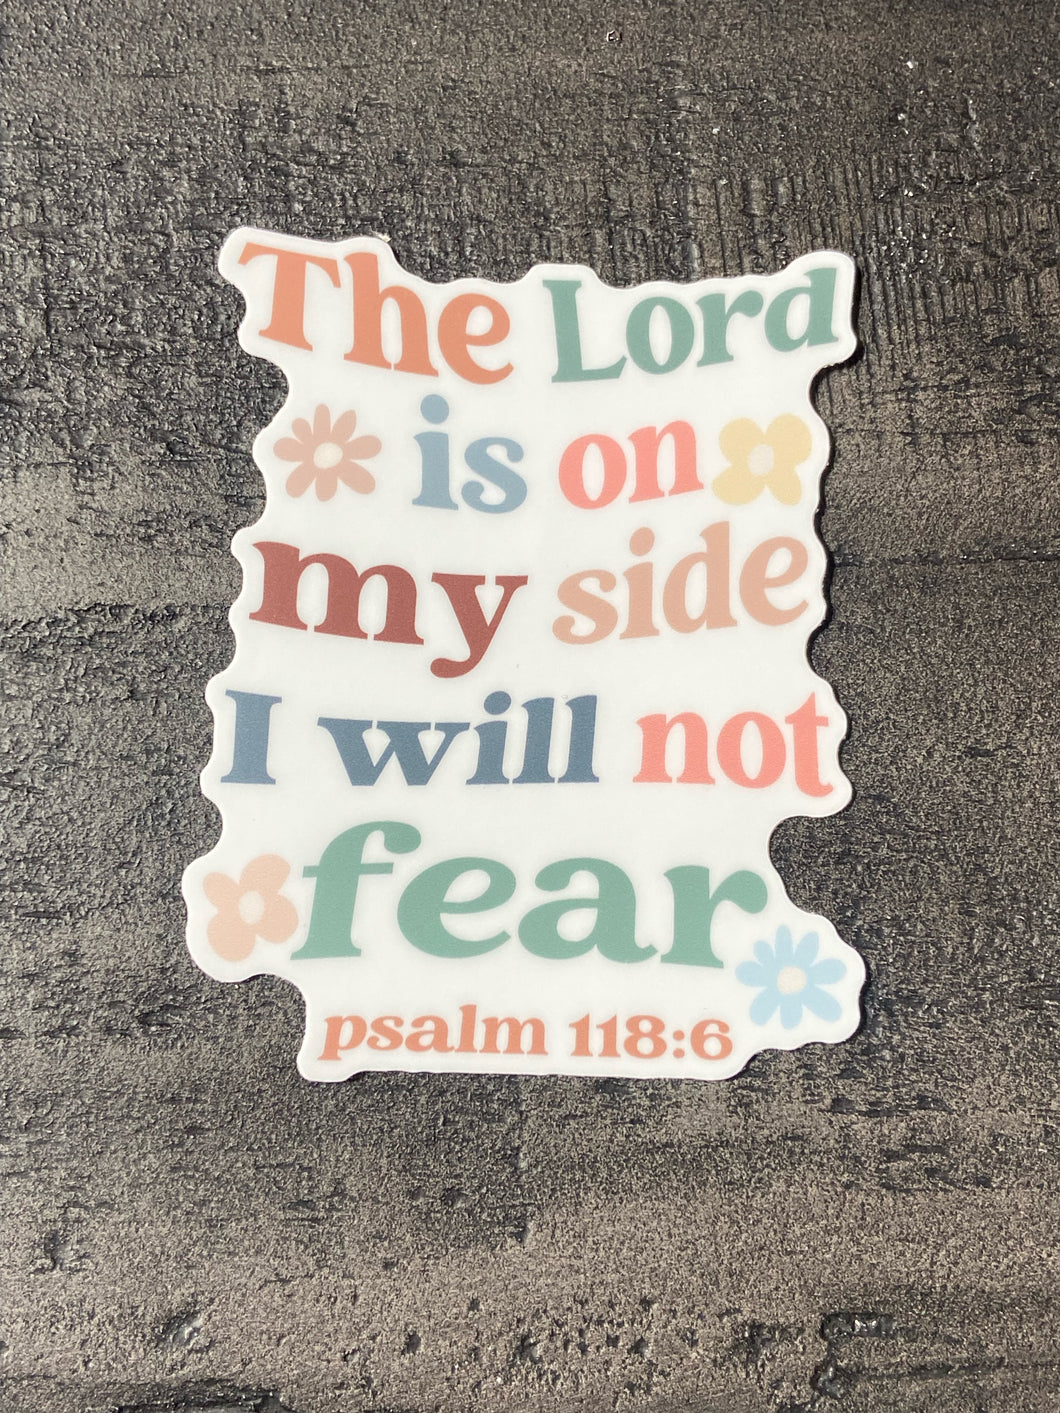 The Lord is on my side I will not fear